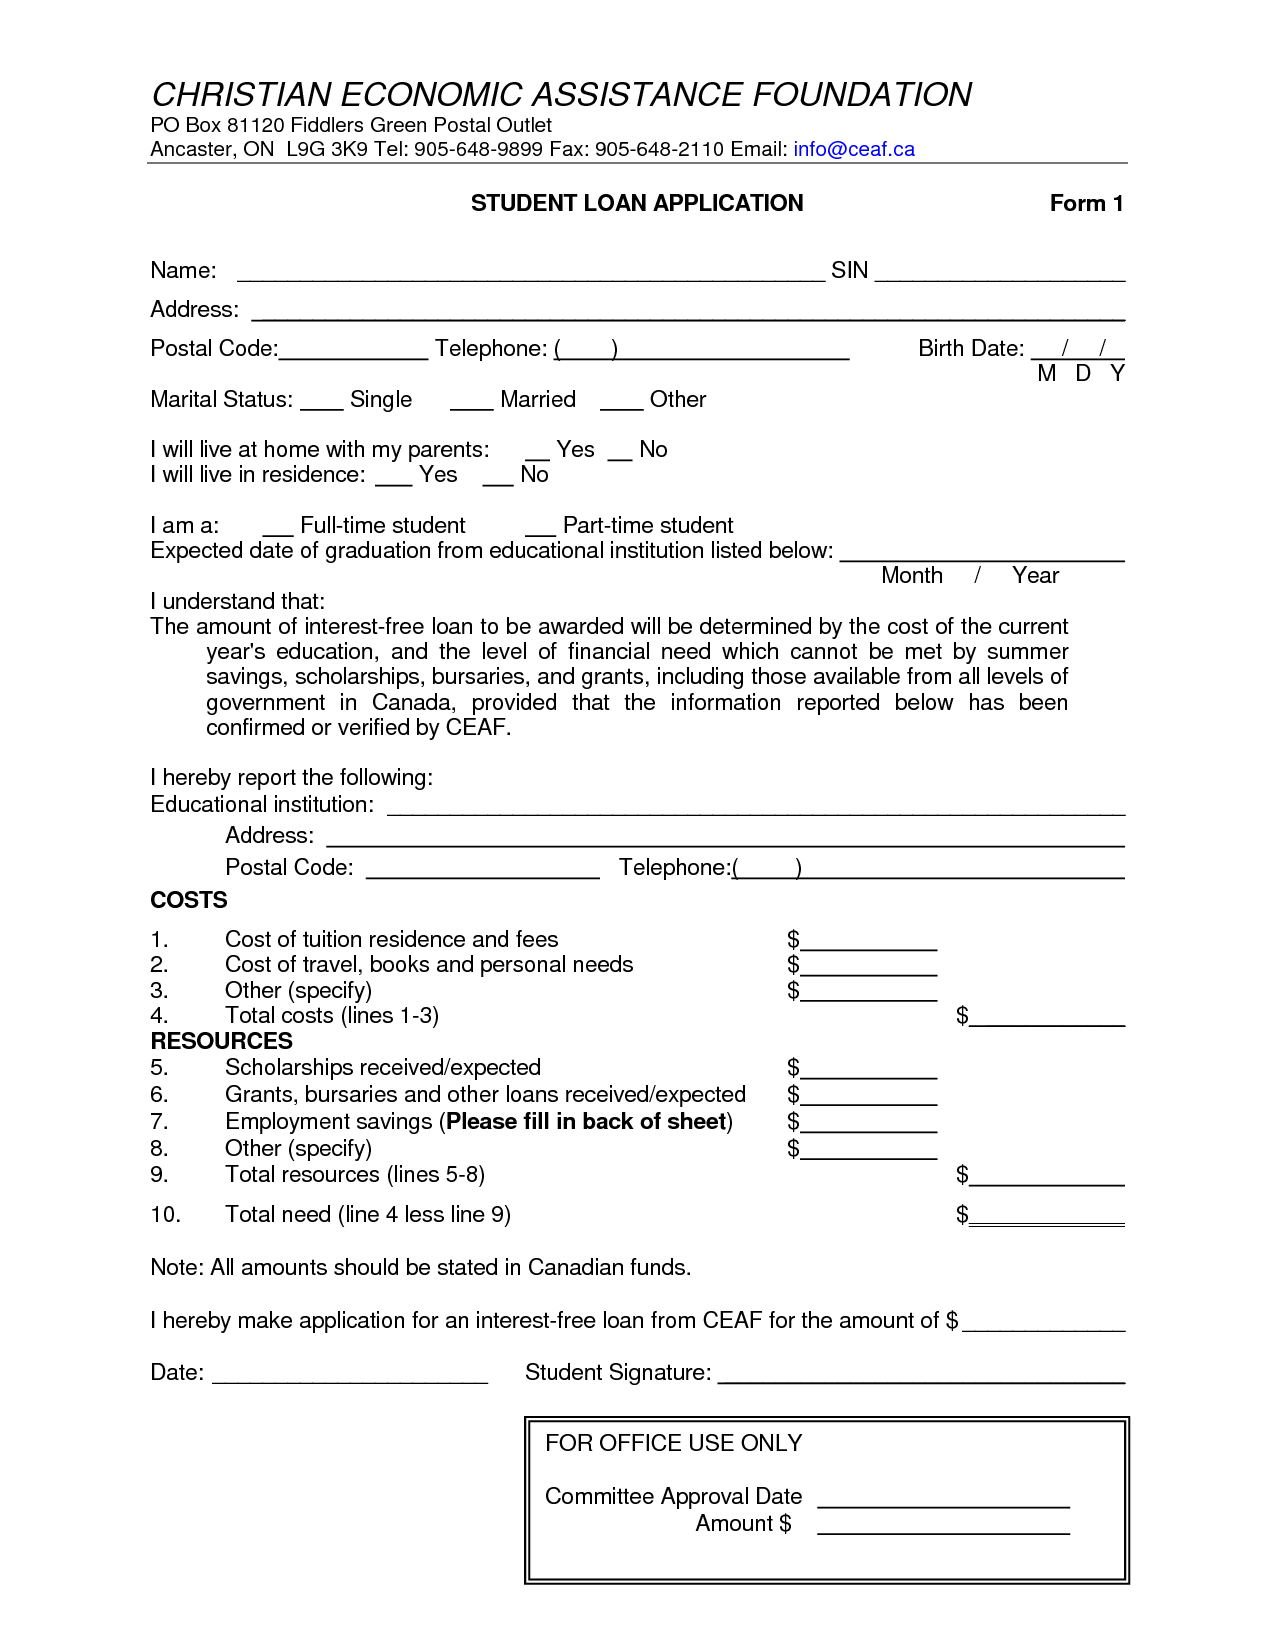 Trade Finance Loan Agreement Template  Great Professional In line of credit loan agreement template